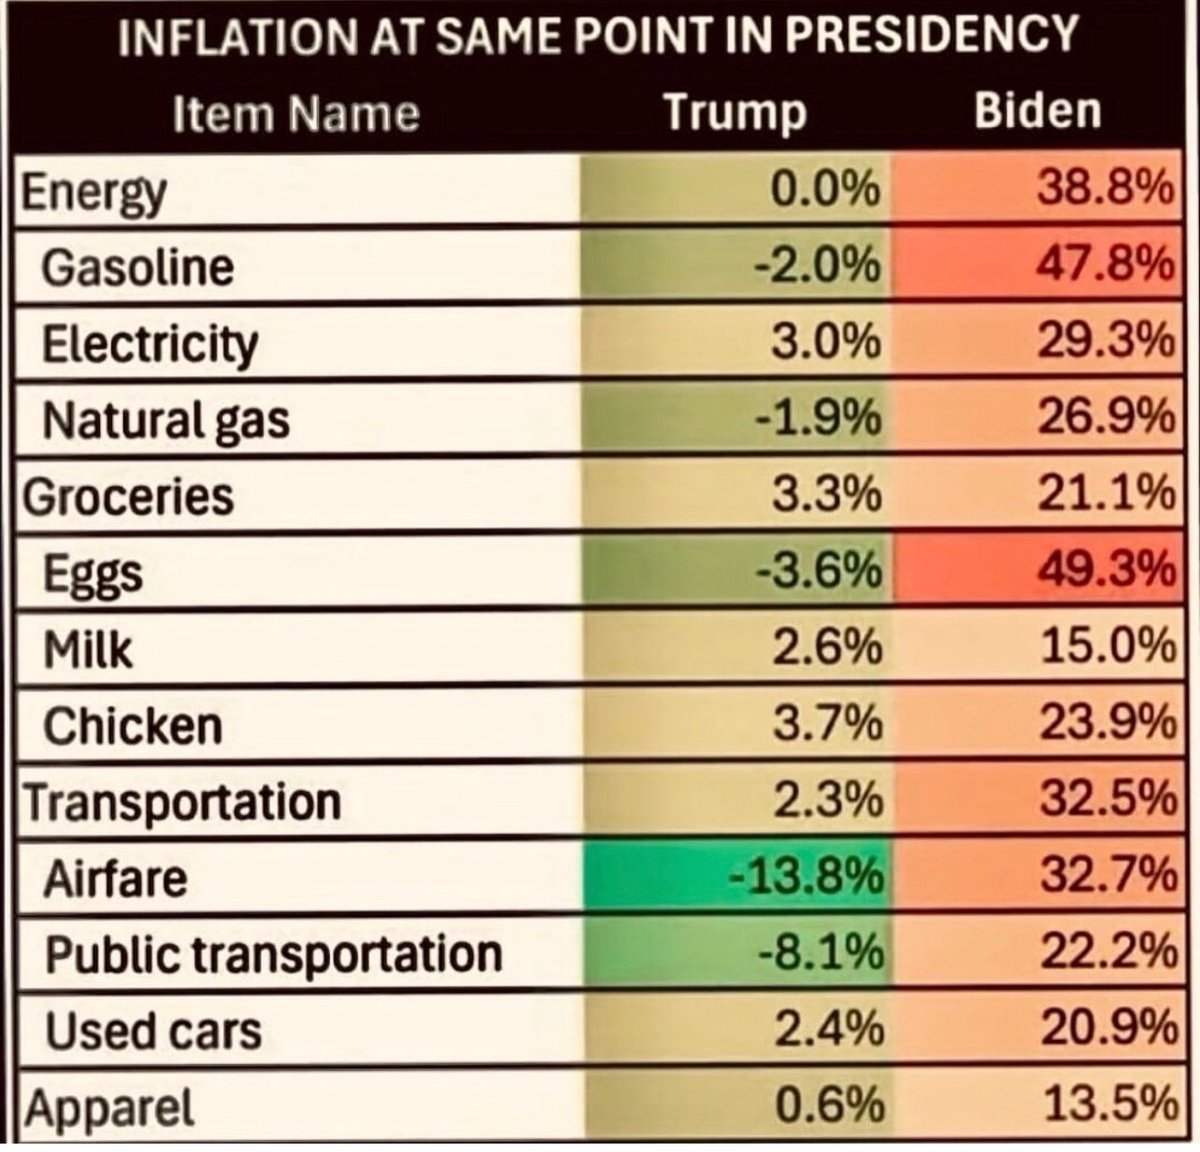 Under Biden, inflation has skyrocketed. Inflation affects low income & middle income Americans the most. Vote Trump for affordable living again.